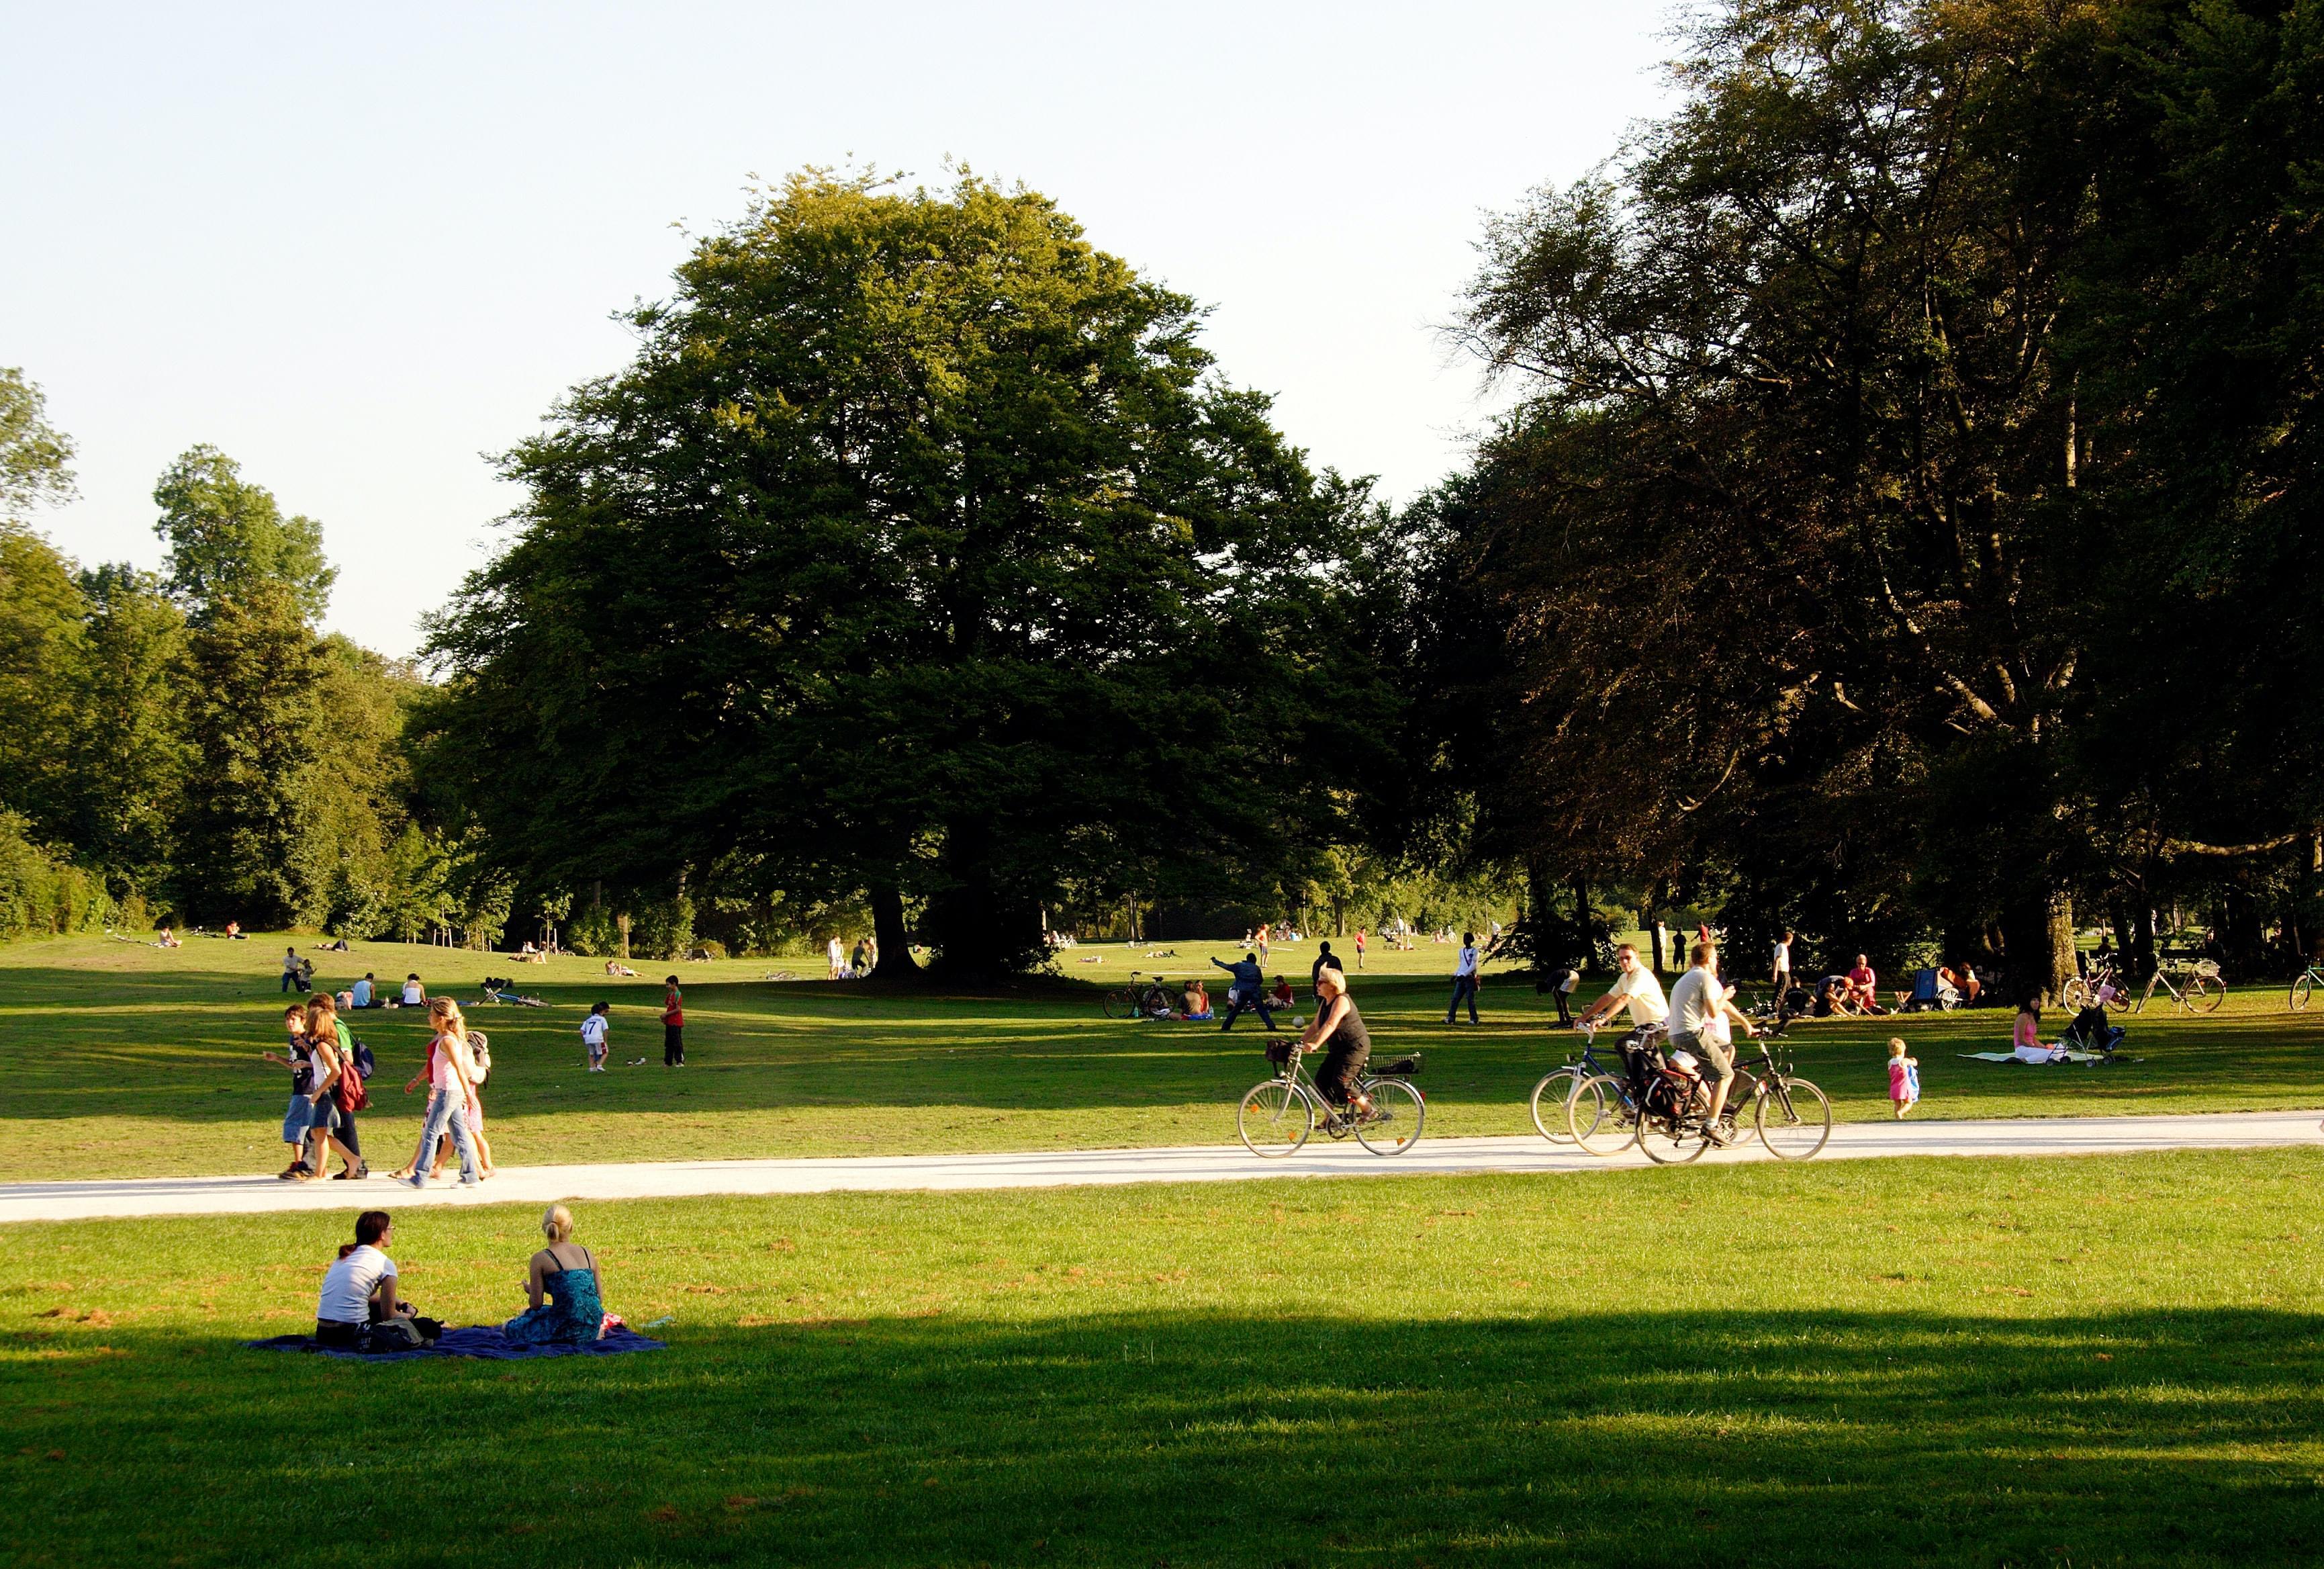 A green park with people walking and on bikes with large trees in the background